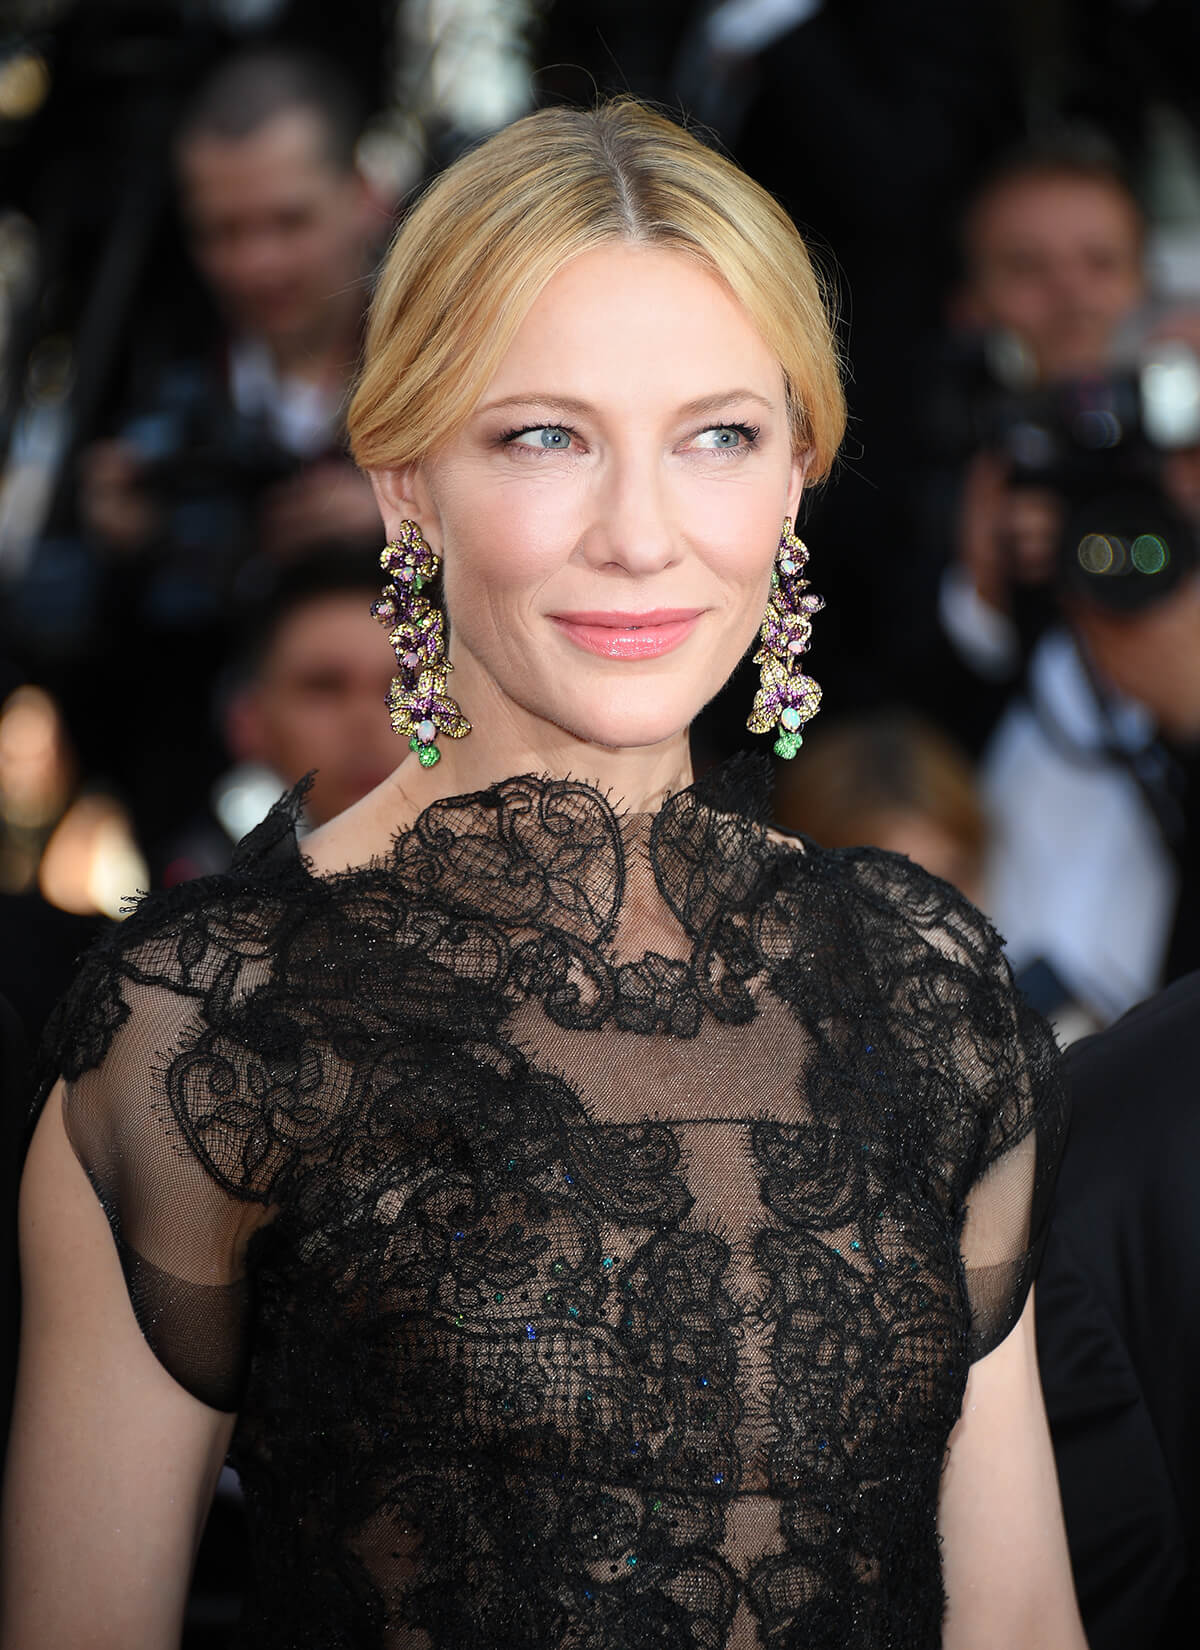 Actress Cate Blanchett on the red carpet in diamond emerald earrings and a black lace dress